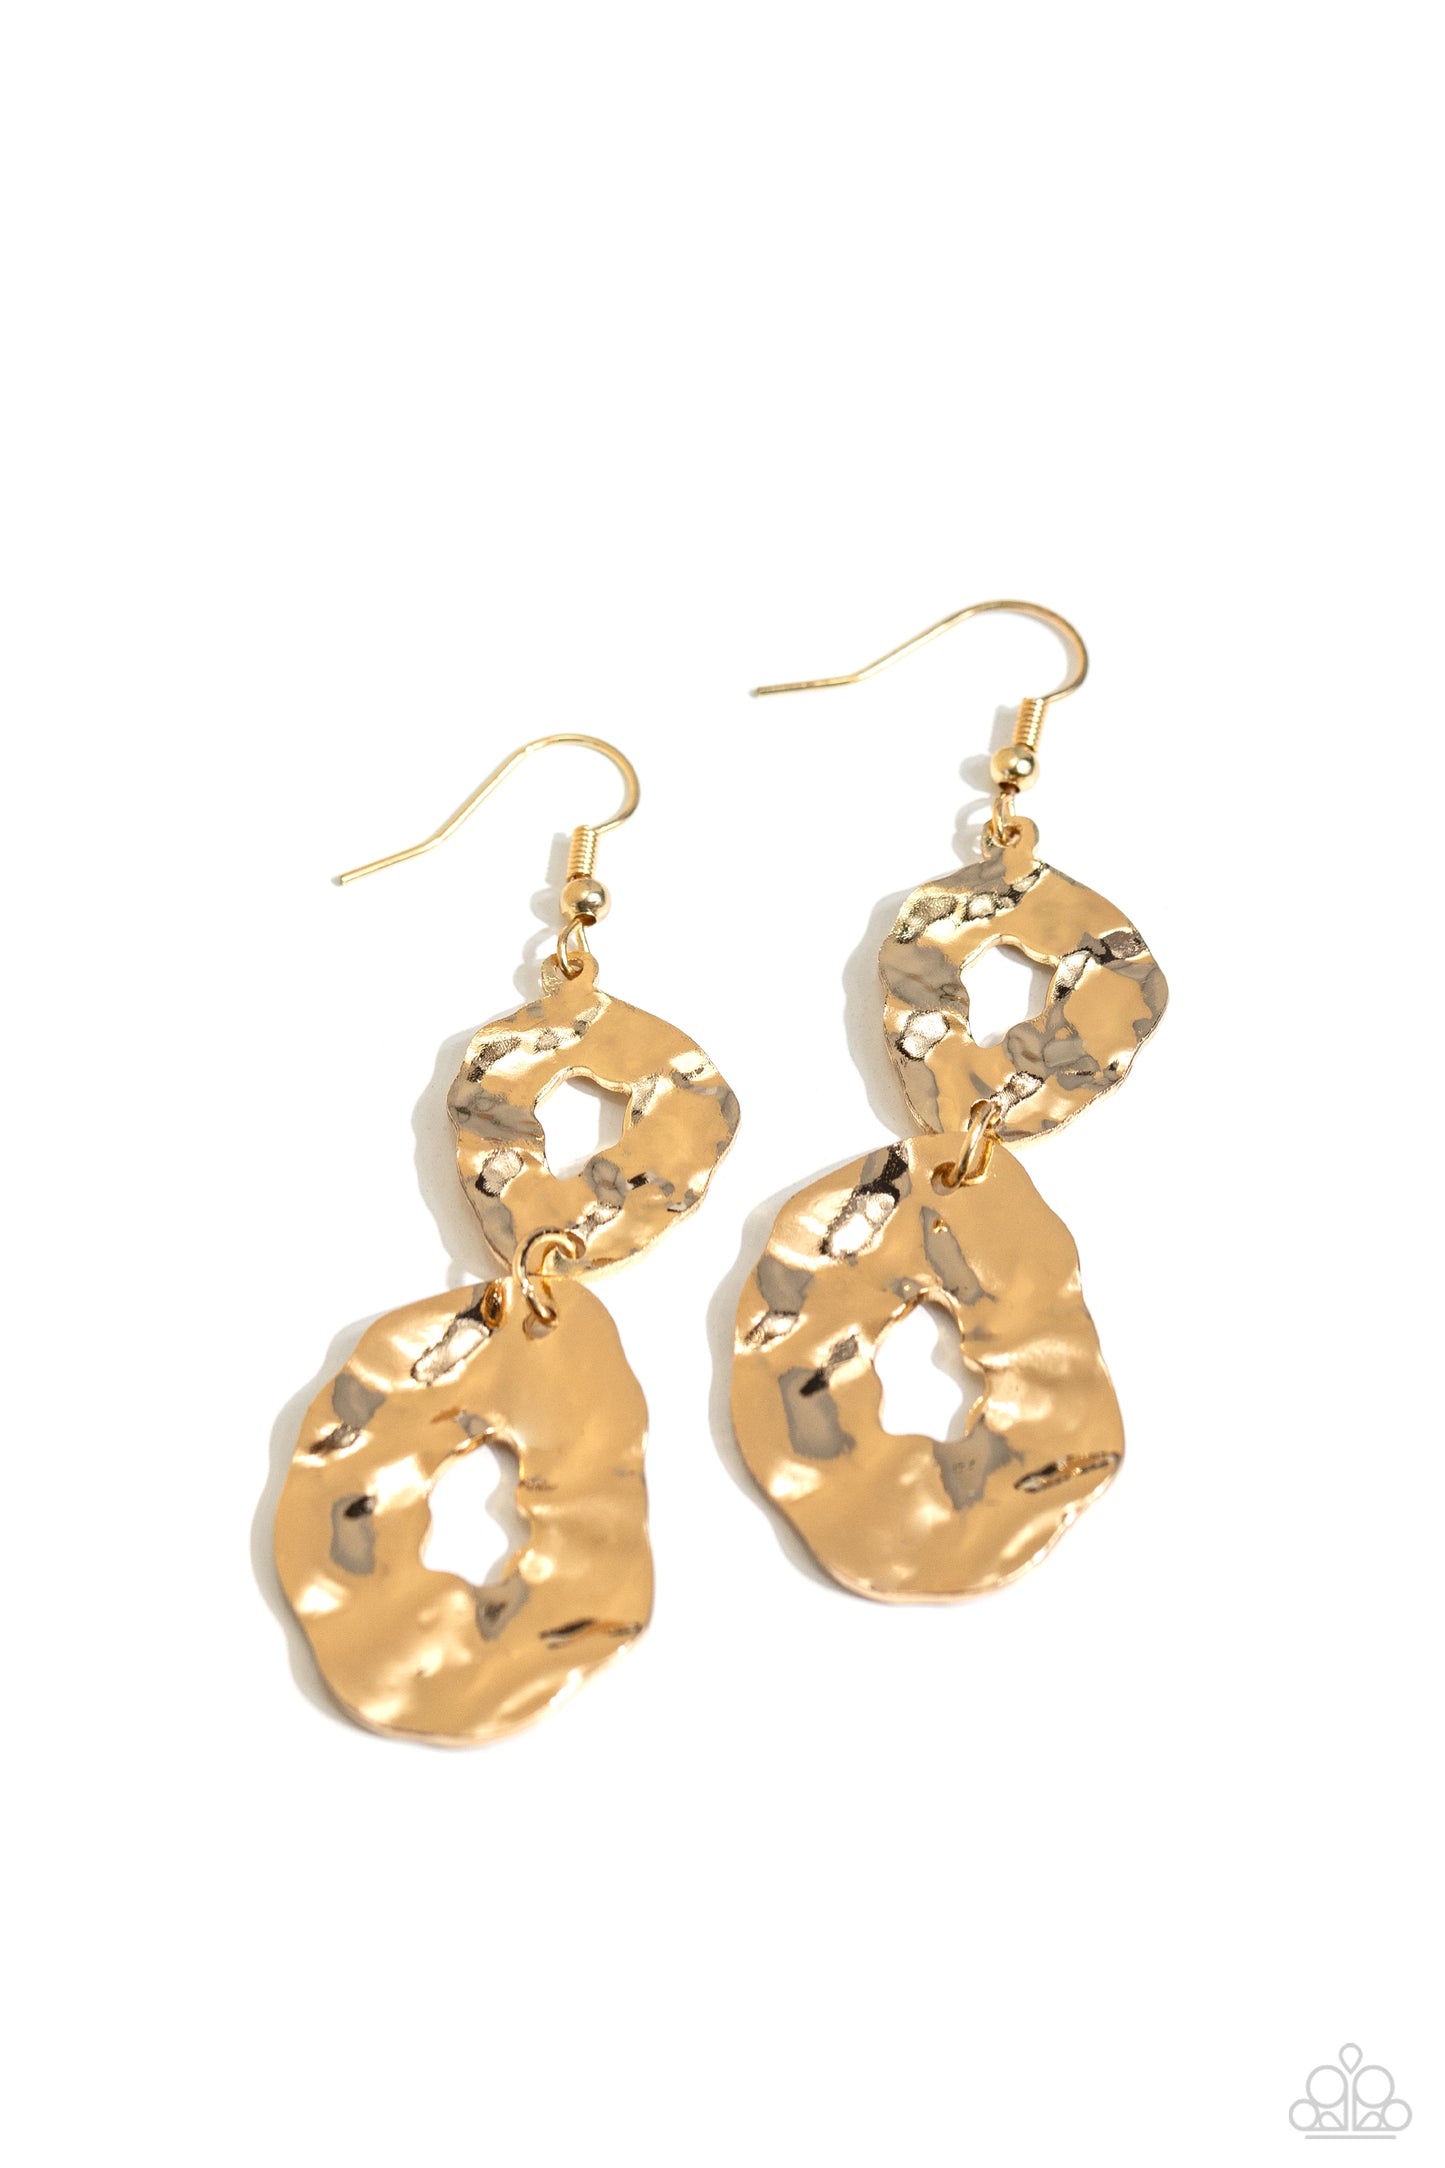 Paparazzi Accessories Gallery Gravitas - Gold Earrings featuring a warped hammered finish, a pair of asymmetrical gold frames delicately link into an abstract lure. Earring attaches to a standard fishhook fitting.  Sold as one pair of earrings.